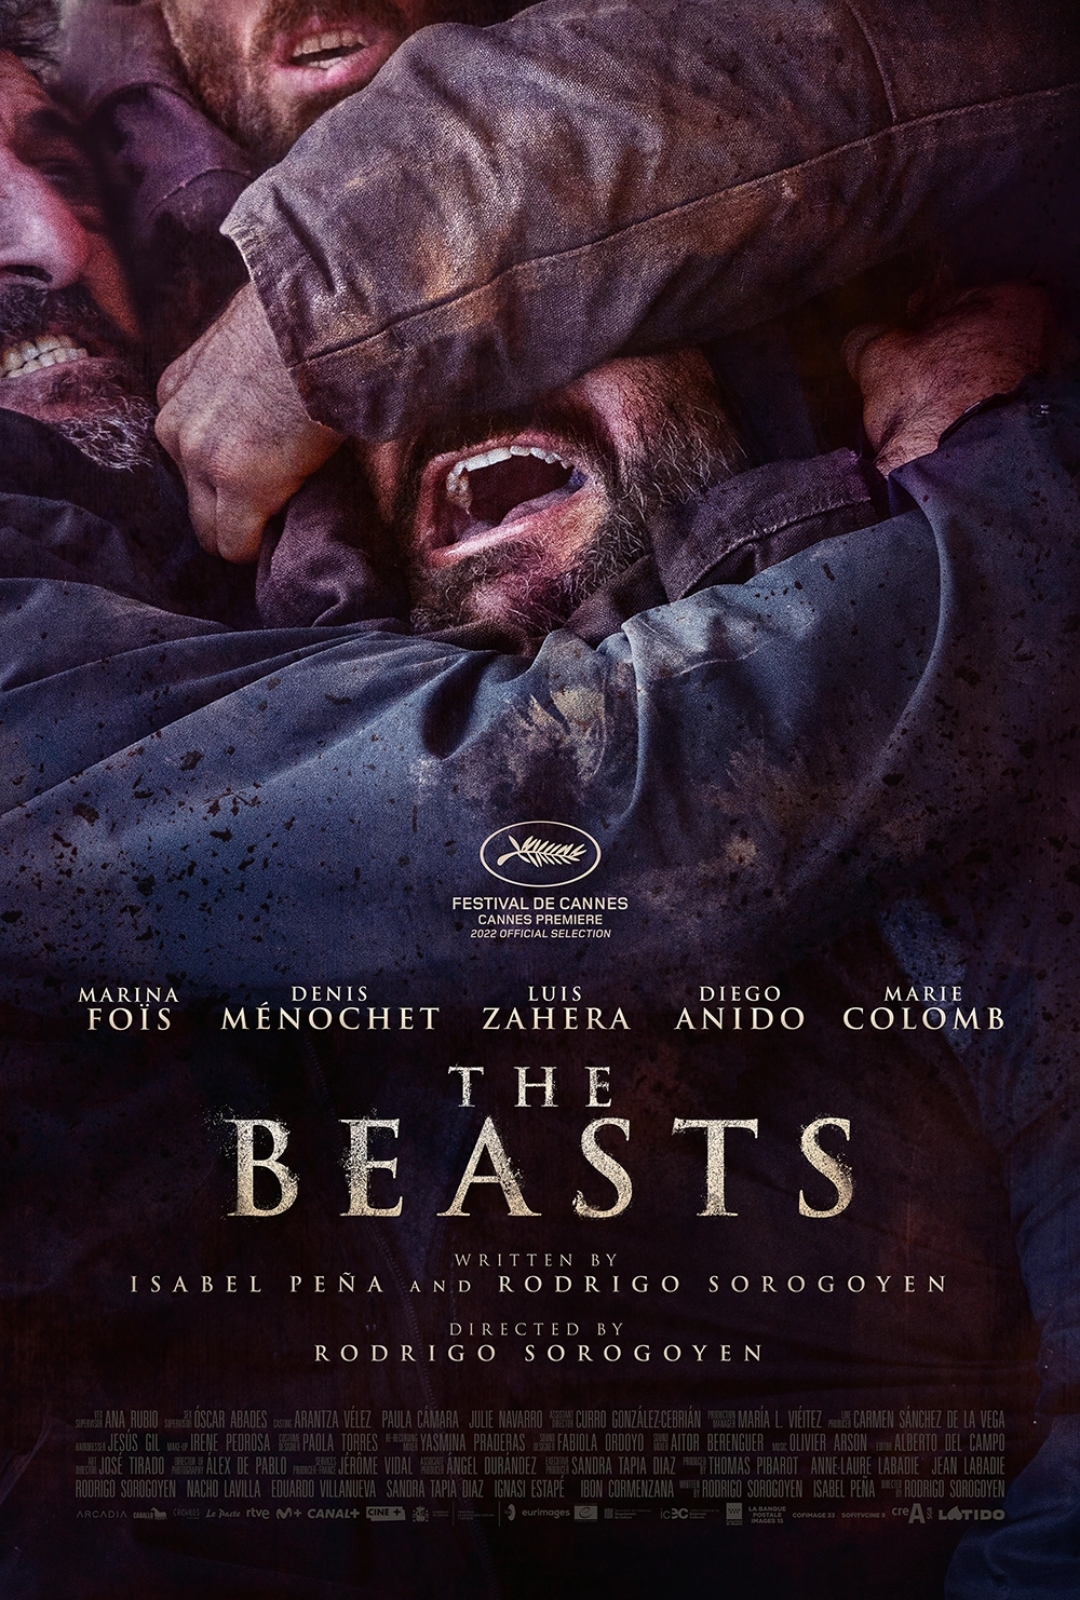 The Alacran Music in Film Award 2023 Goes to "The Beasts" Best Original Score this year at the Miami International Film Festival. Congratulations!